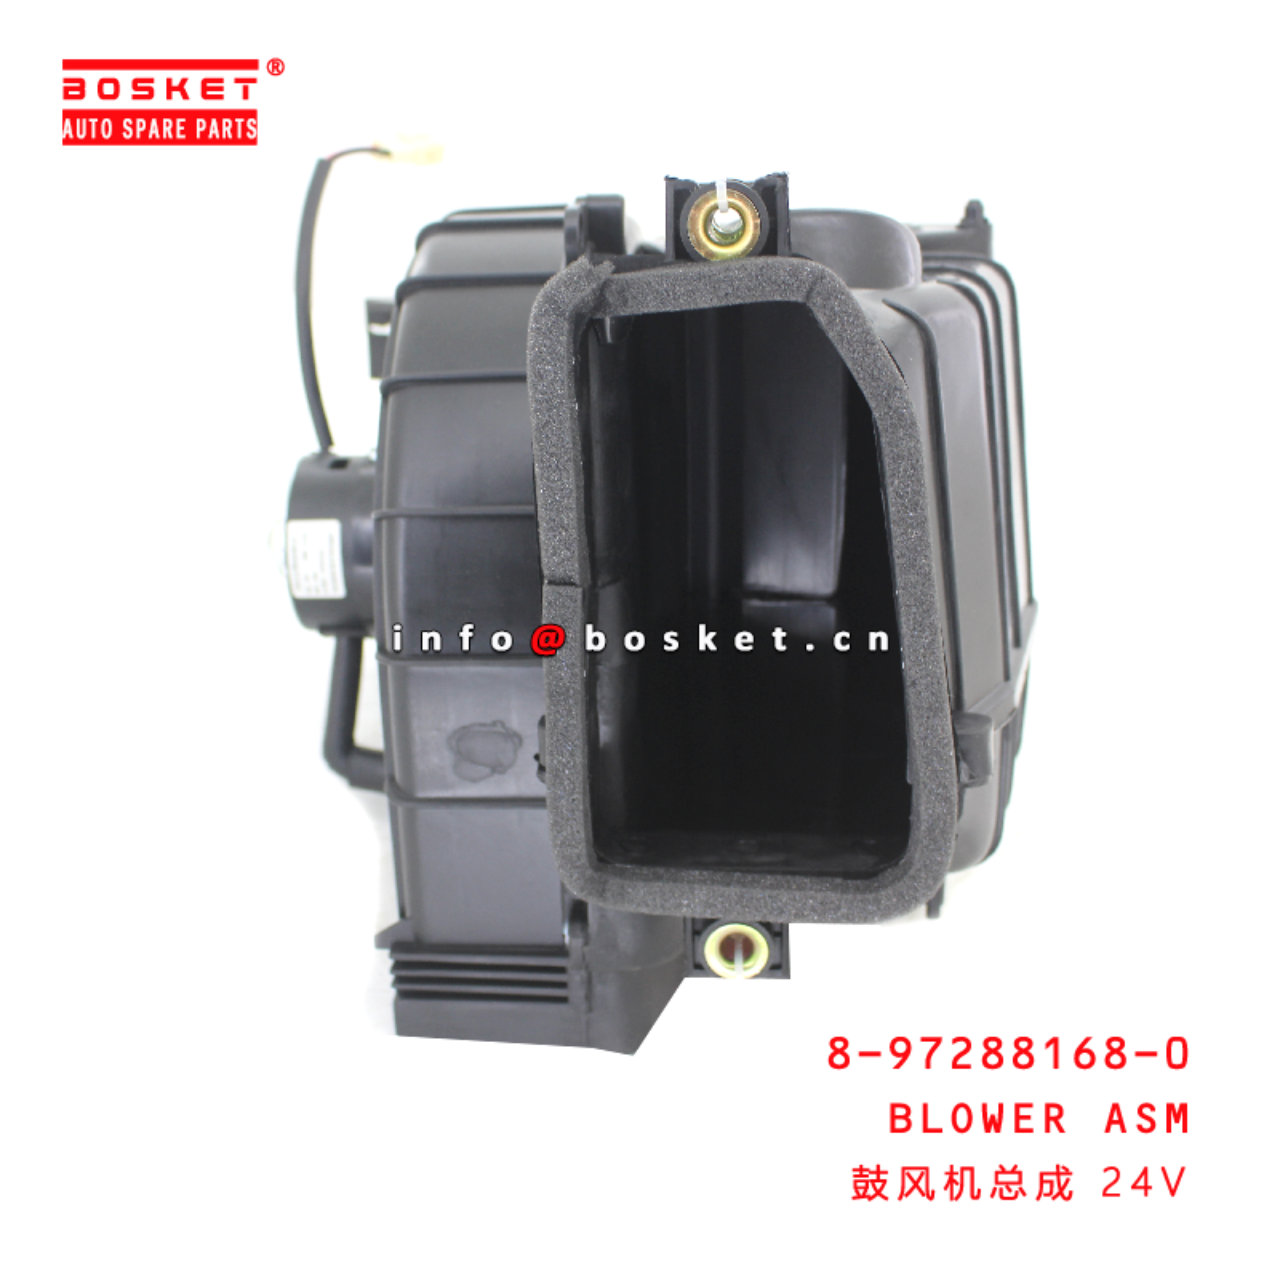 8-97288168-0 Blower Assembly suitable for ISUZU NQR71 8972881680